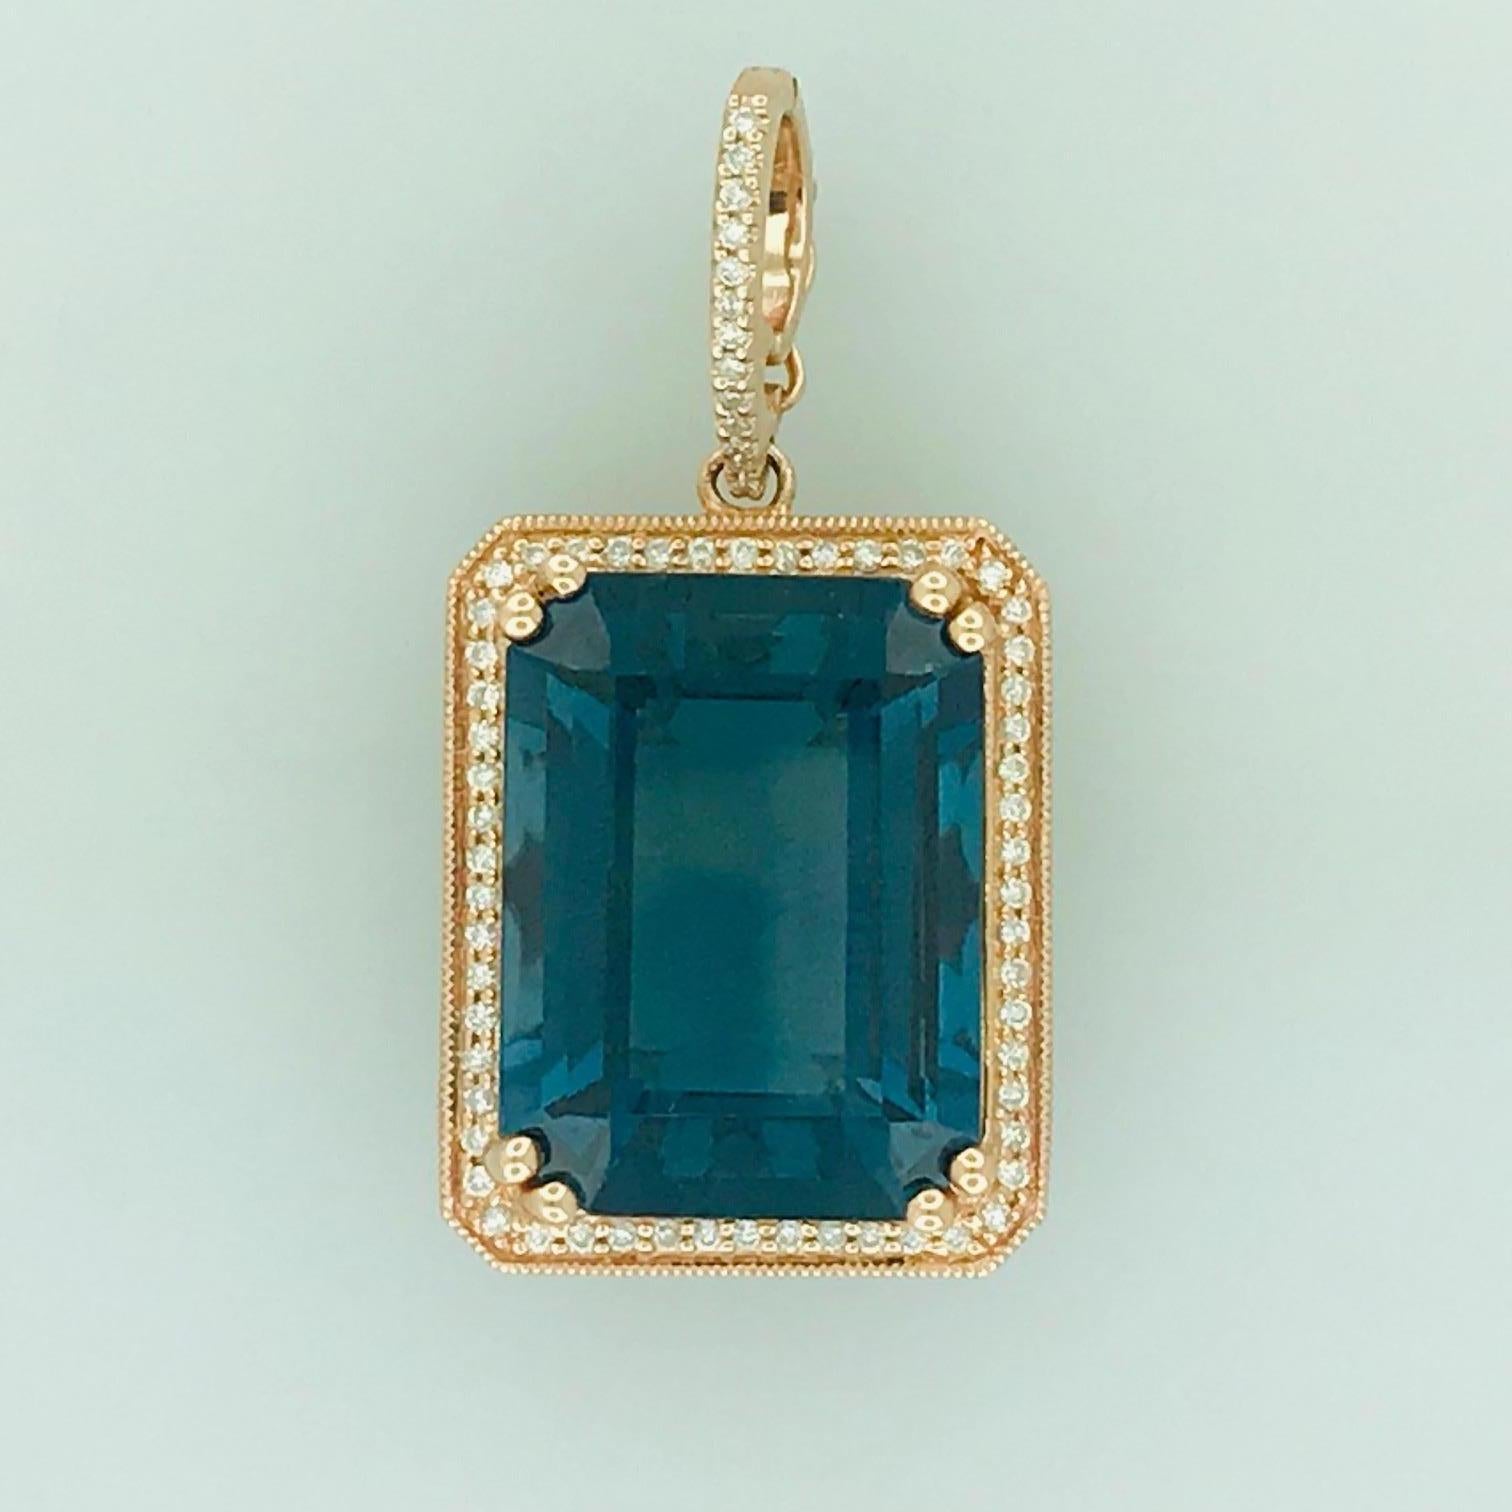 This London Blue Topaz and Diamond Pendant is very unique. The Emerald cut Royal Blue/London Blue Topaz is a rich deep blue color with a hint of green. The color is captivating and especially striking in this rose gold setting. The Royal Blue Topaz